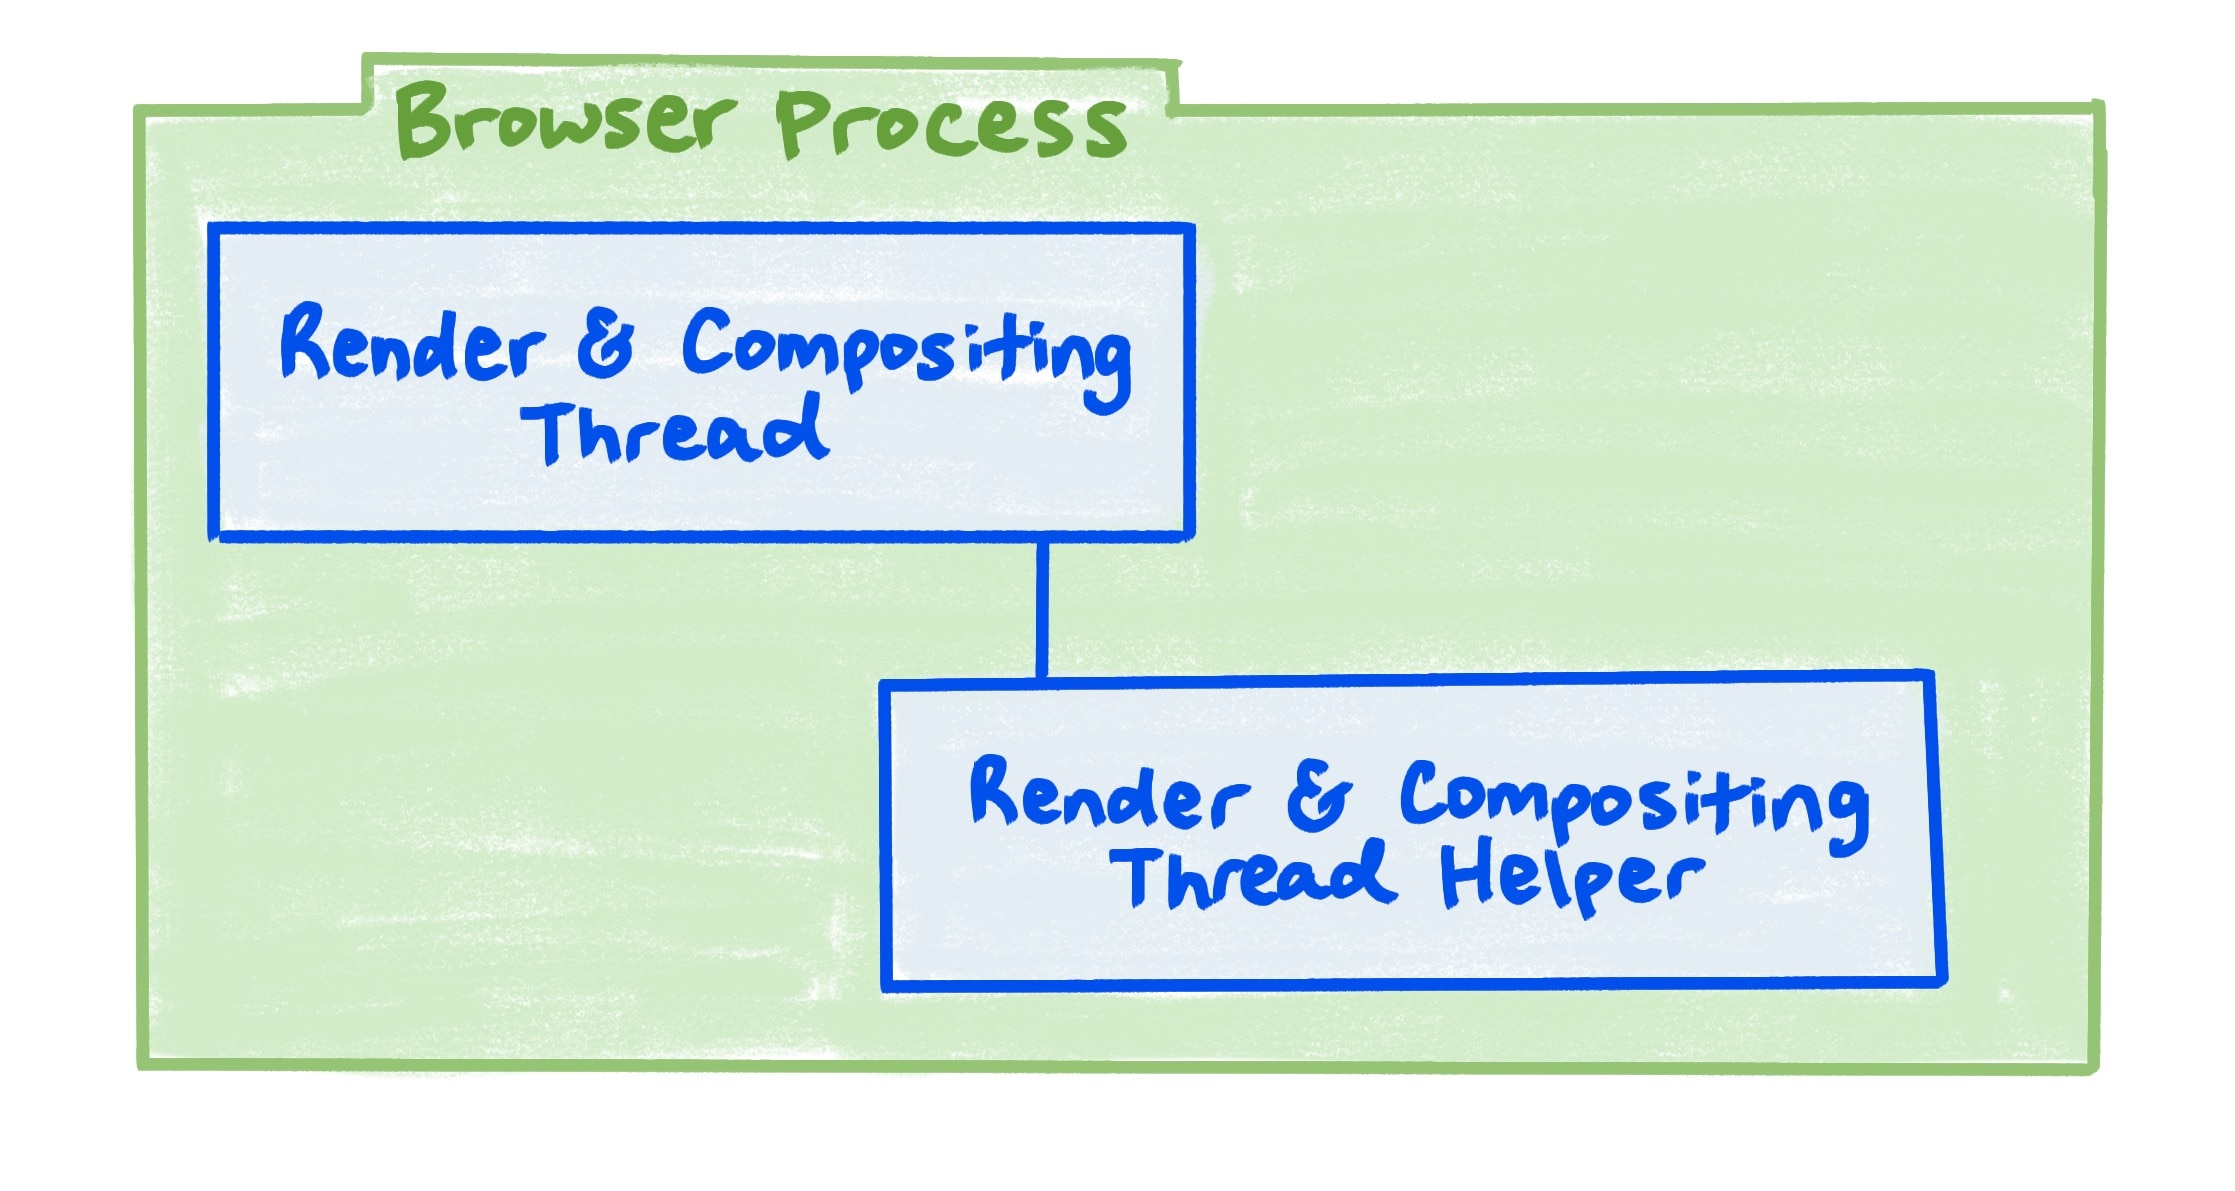 A browser process diagram showing the relationship between the Render and compositing thread, and the render and compositing thread helper.